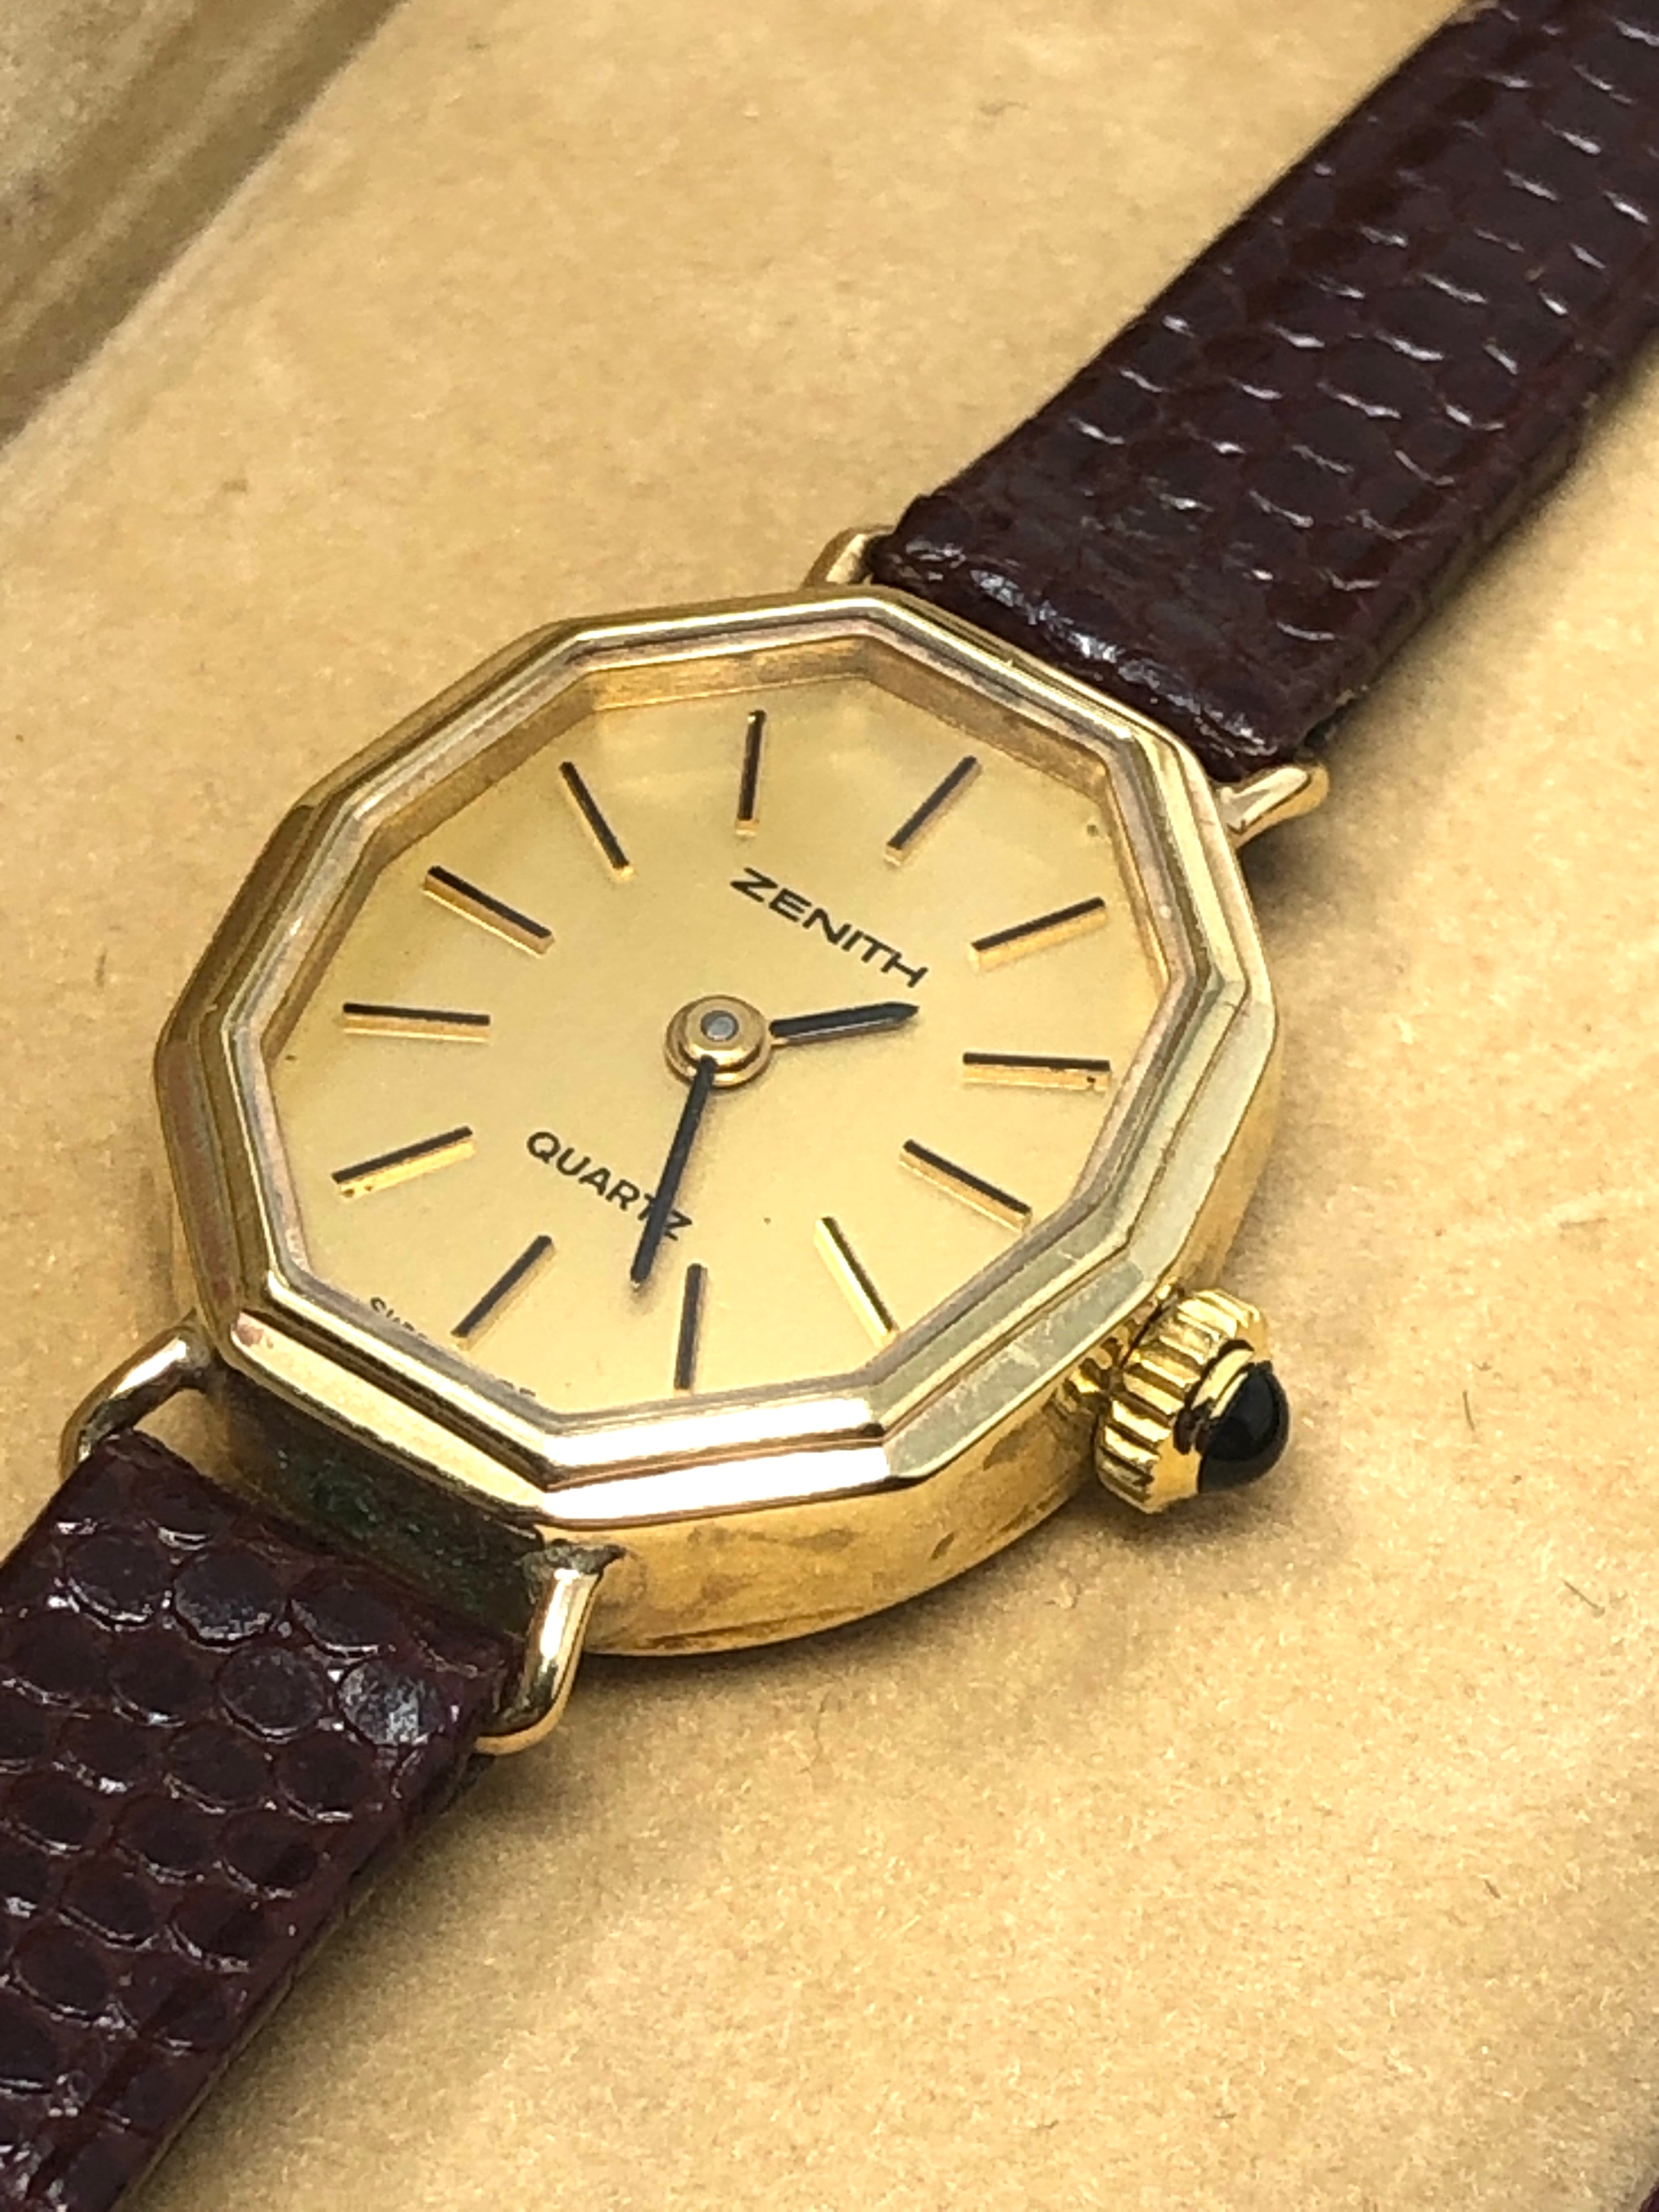 Boxed Ladies 9ct gold Zenith quartz wristwatch the watch is ticking - Image 2 of 3